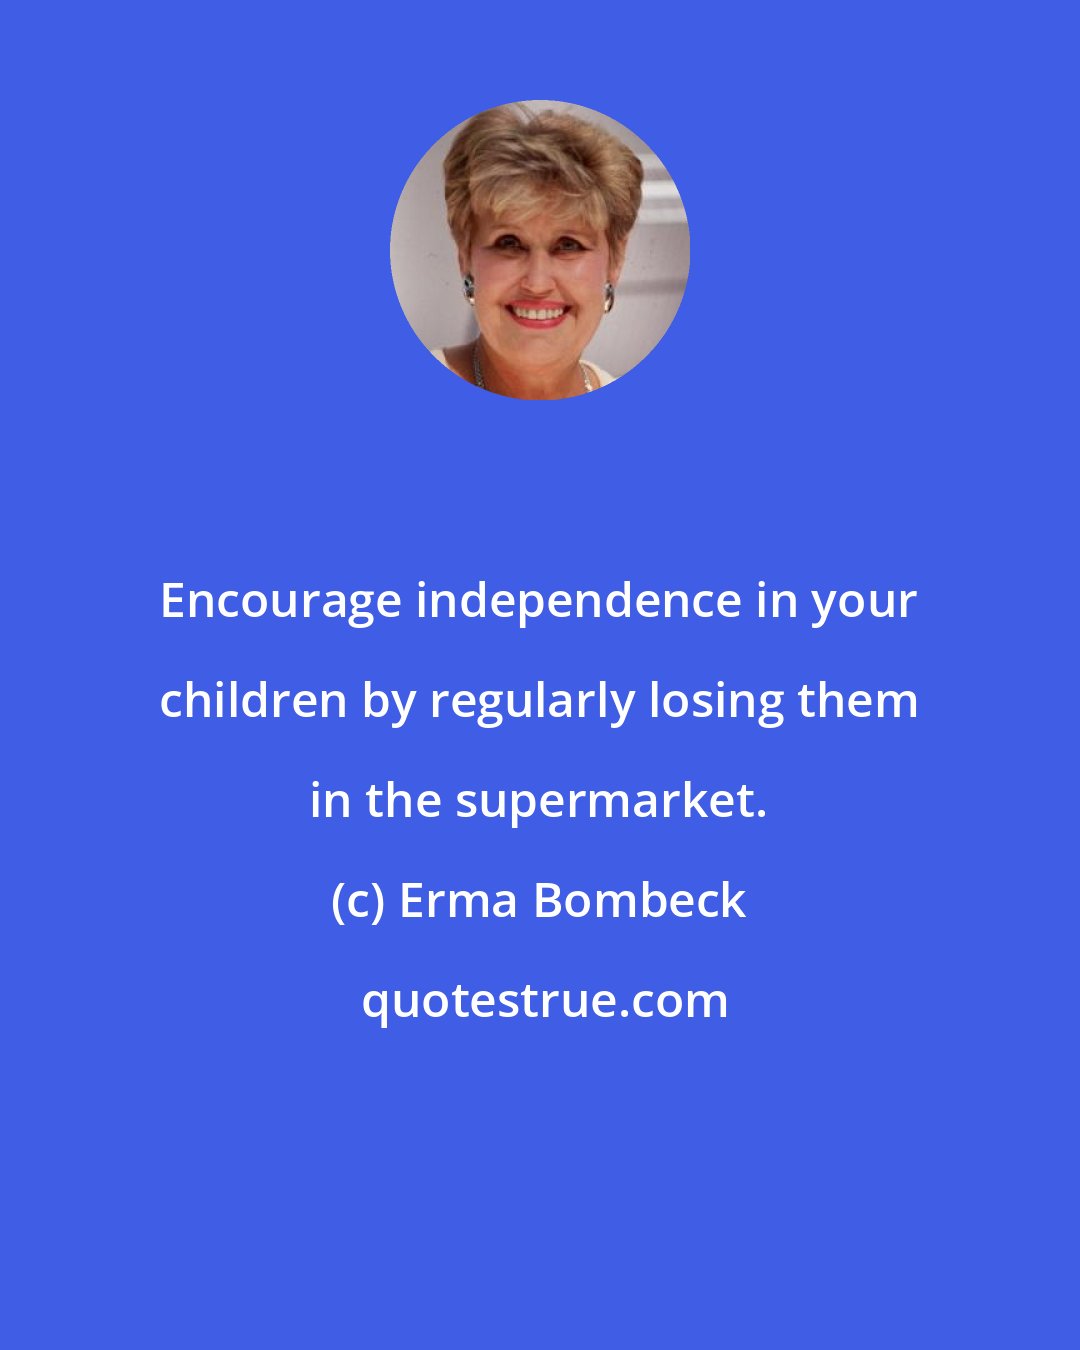 Erma Bombeck: Encourage independence in your children by regularly losing them in the supermarket.